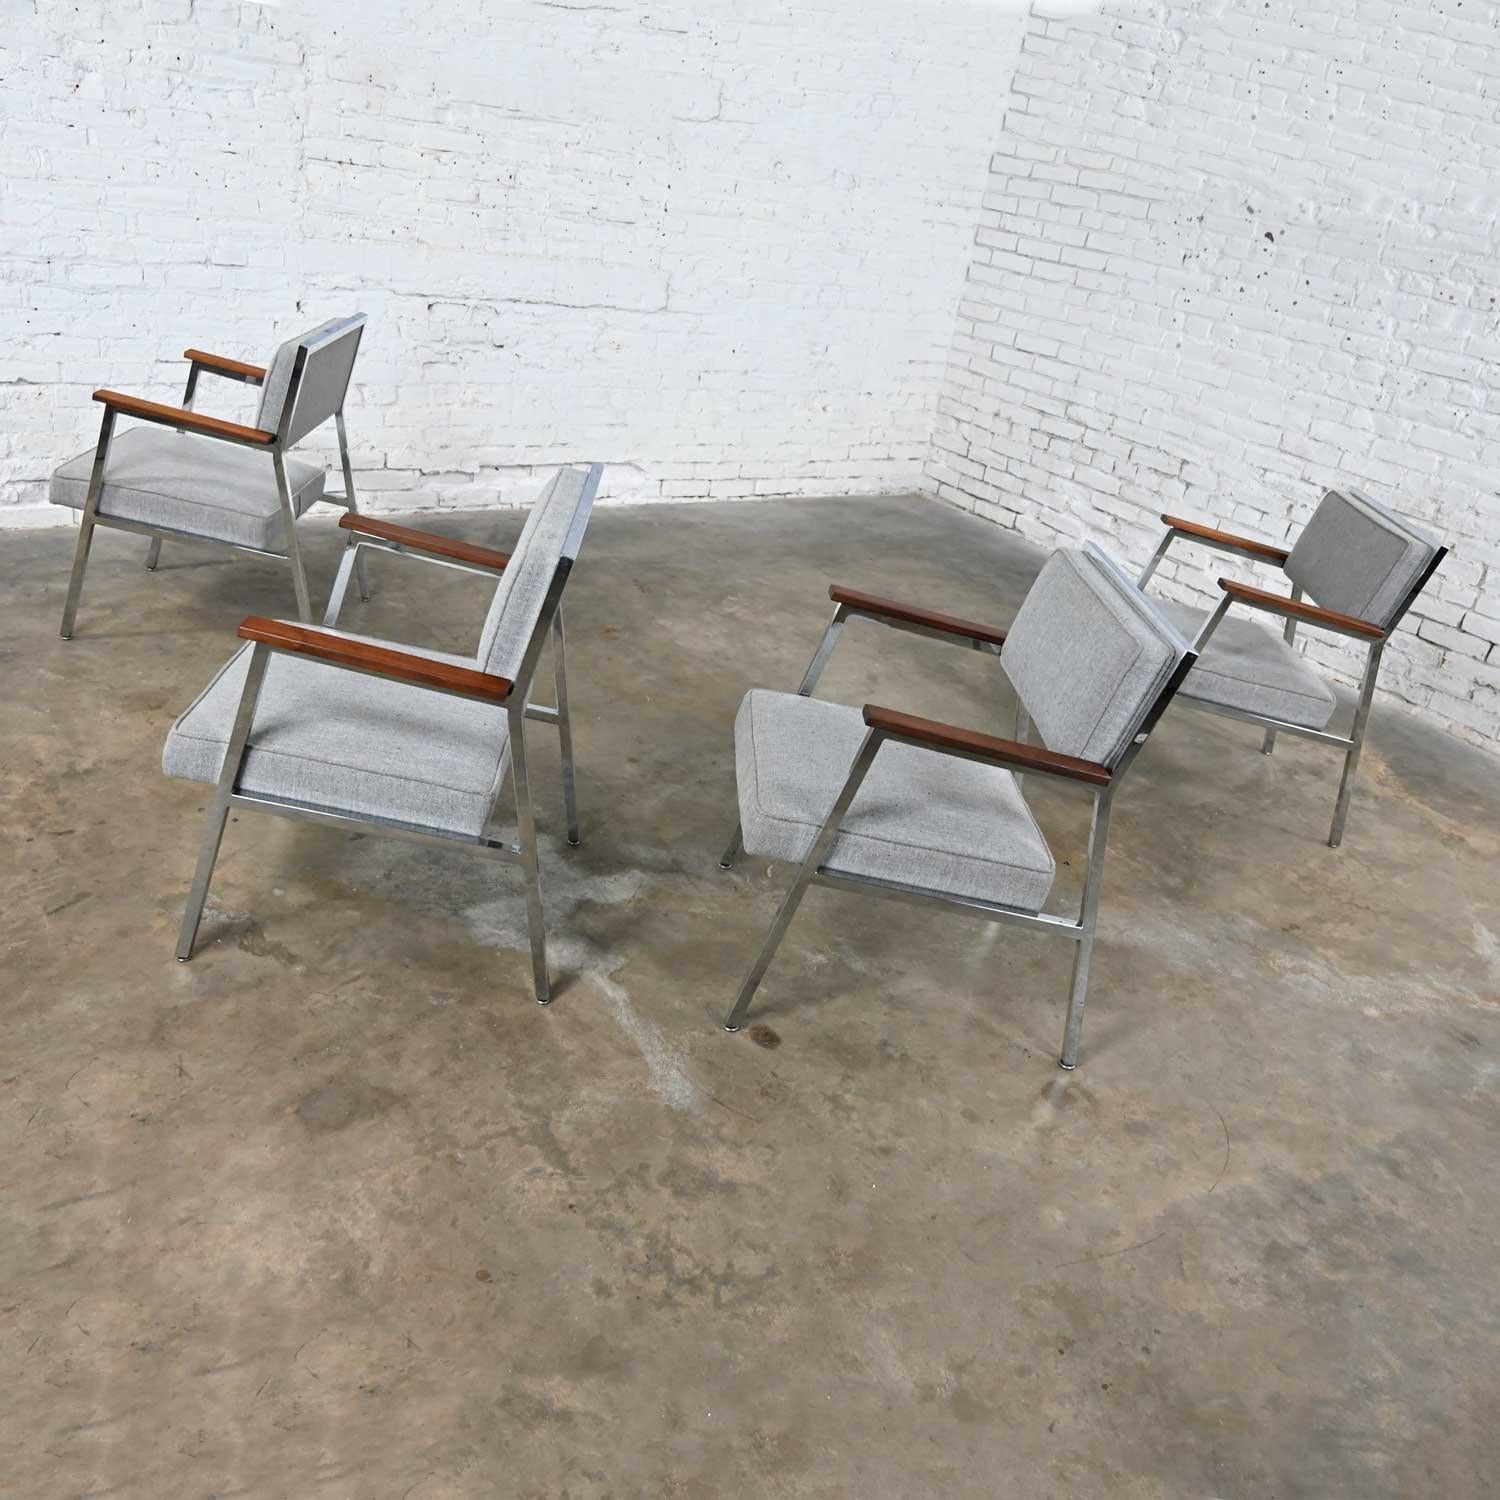 20th Century Mid-Century Modern Industrial Style Chrome & Gray Armchairs by Steelcase set 4 For Sale